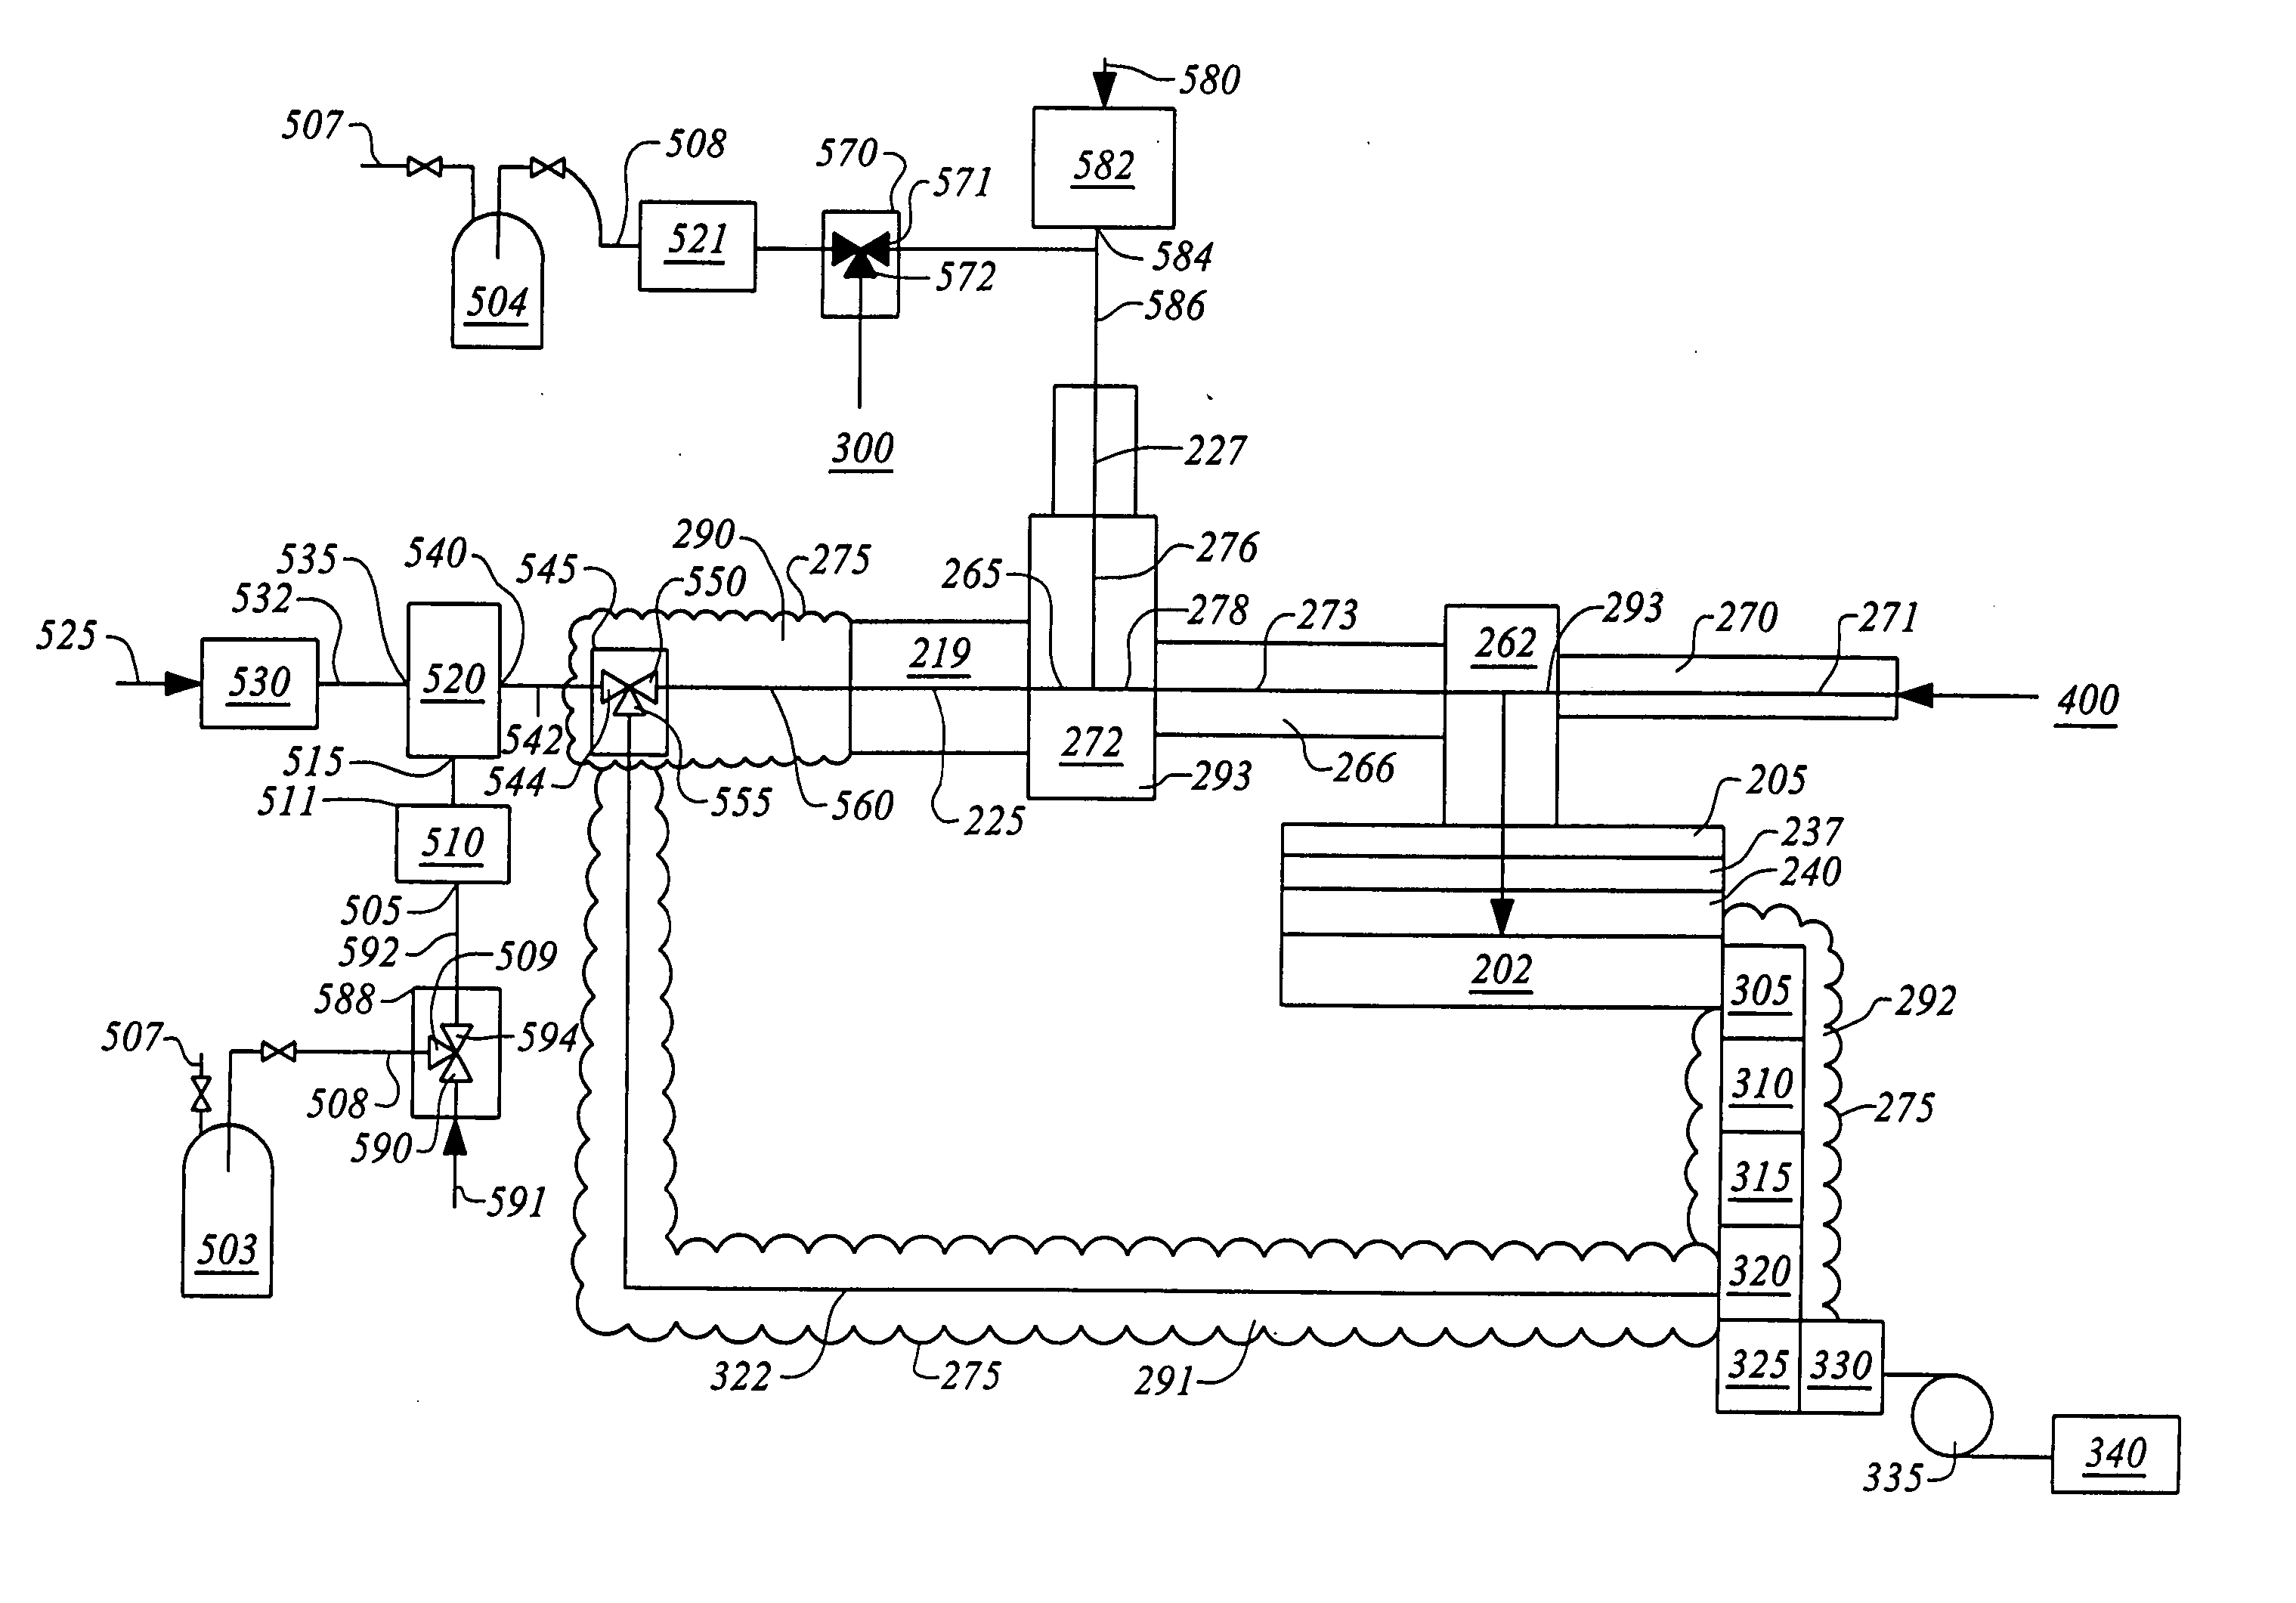 Apparatus for the deposition of high dielectric constant films